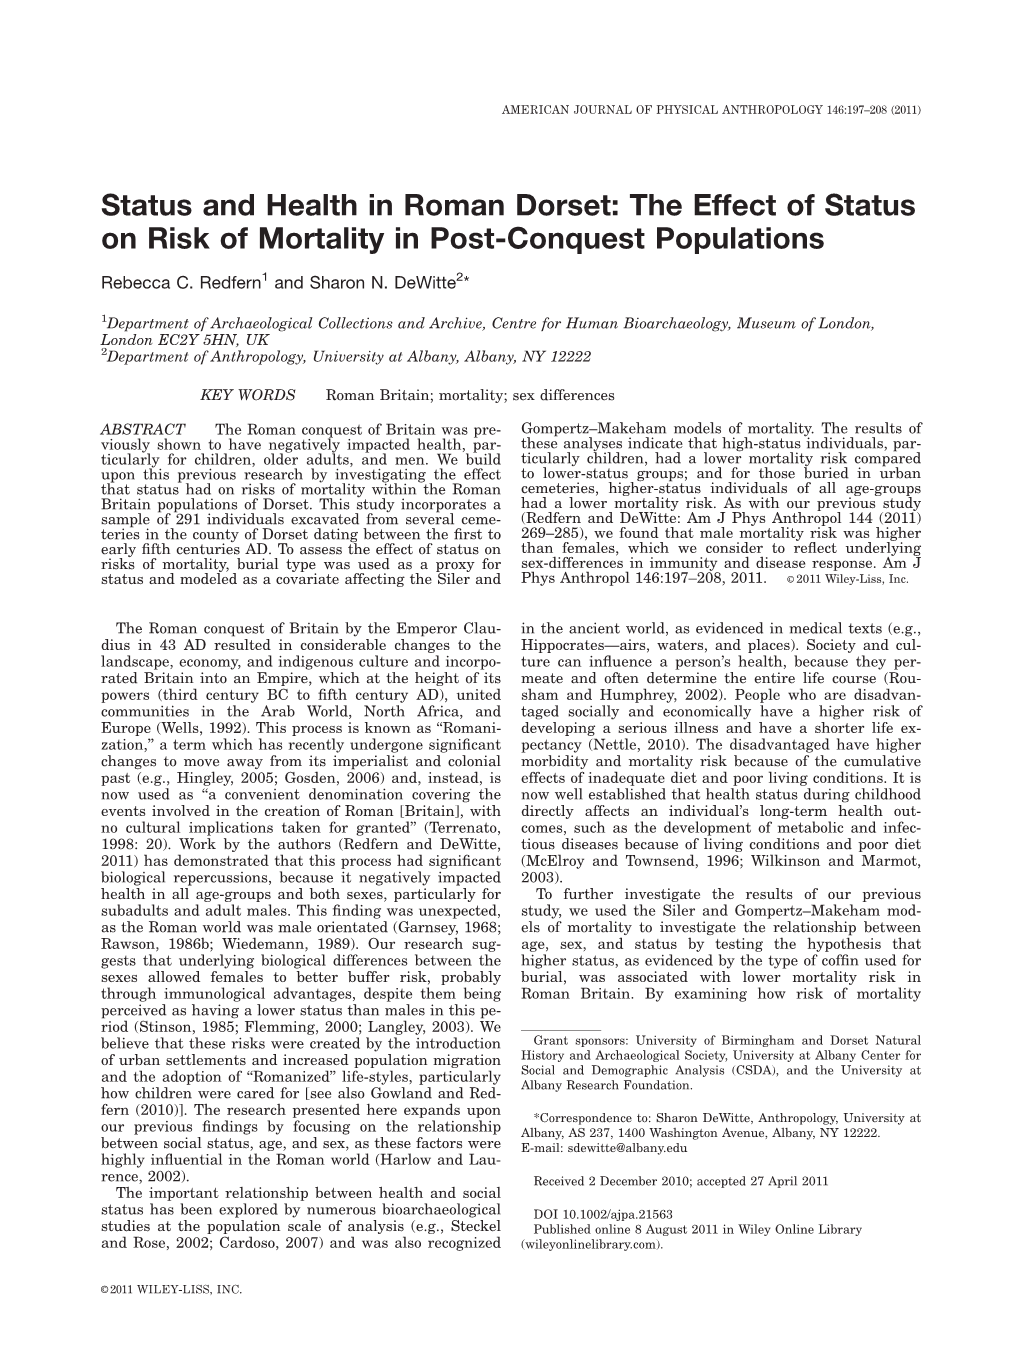 Status and Health in Roman Dorset: the Effect of Status on Risk of Mortality in Post-Conquest Populations Rebecca C